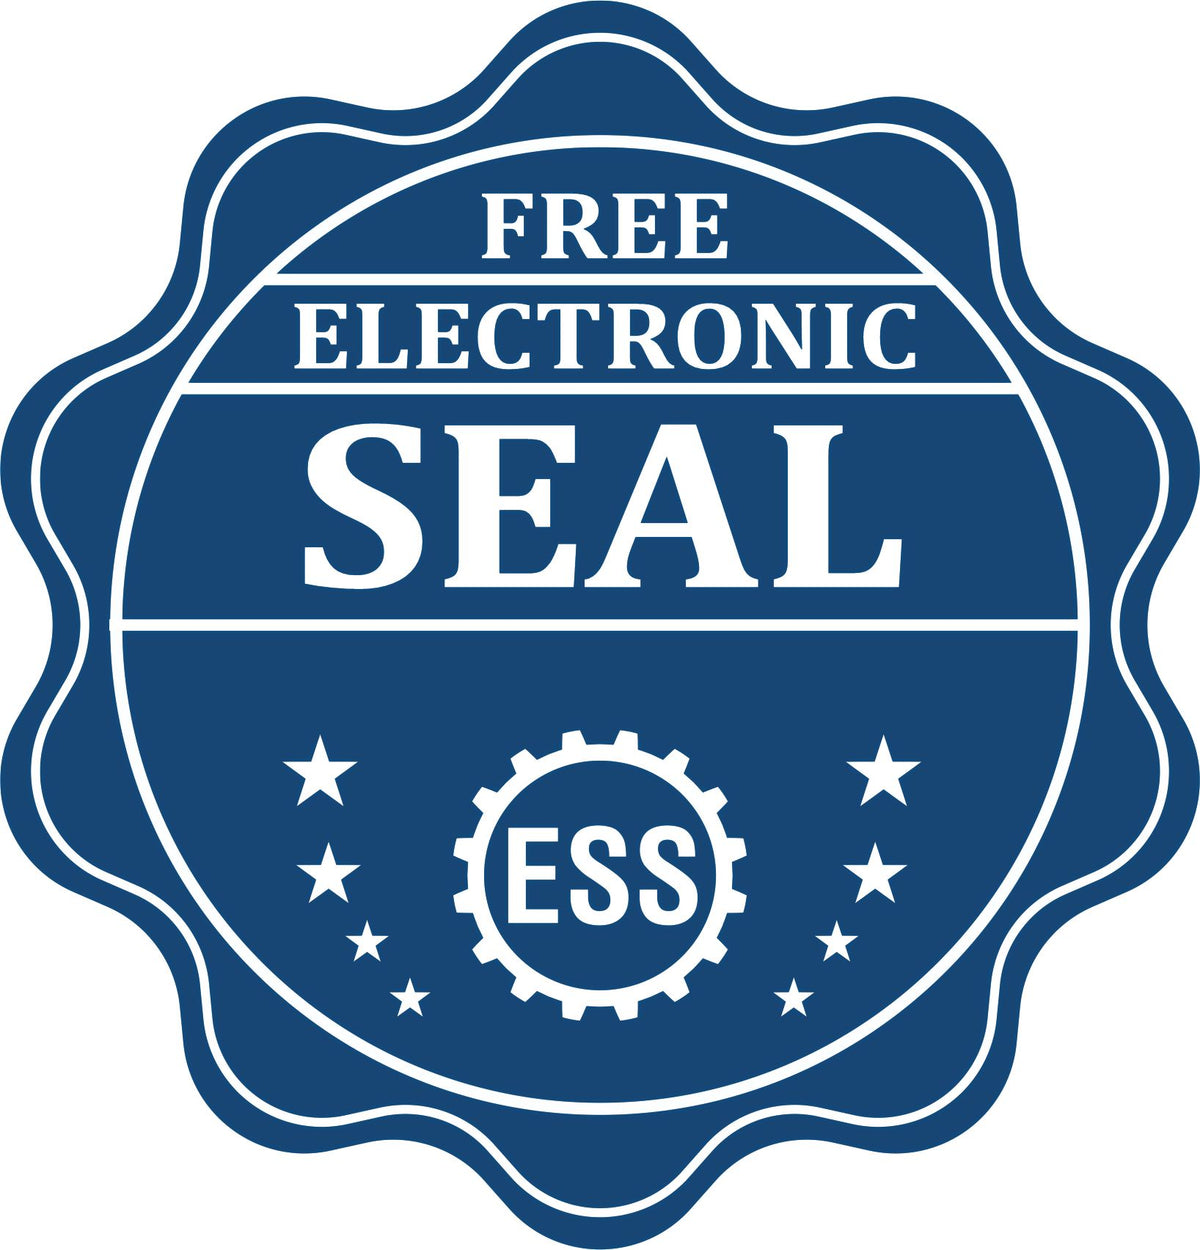 A badge showing a free electronic seal for the Louisiana Professional Engineer Seal Stamp with stars and the ESS gear on the emblem.